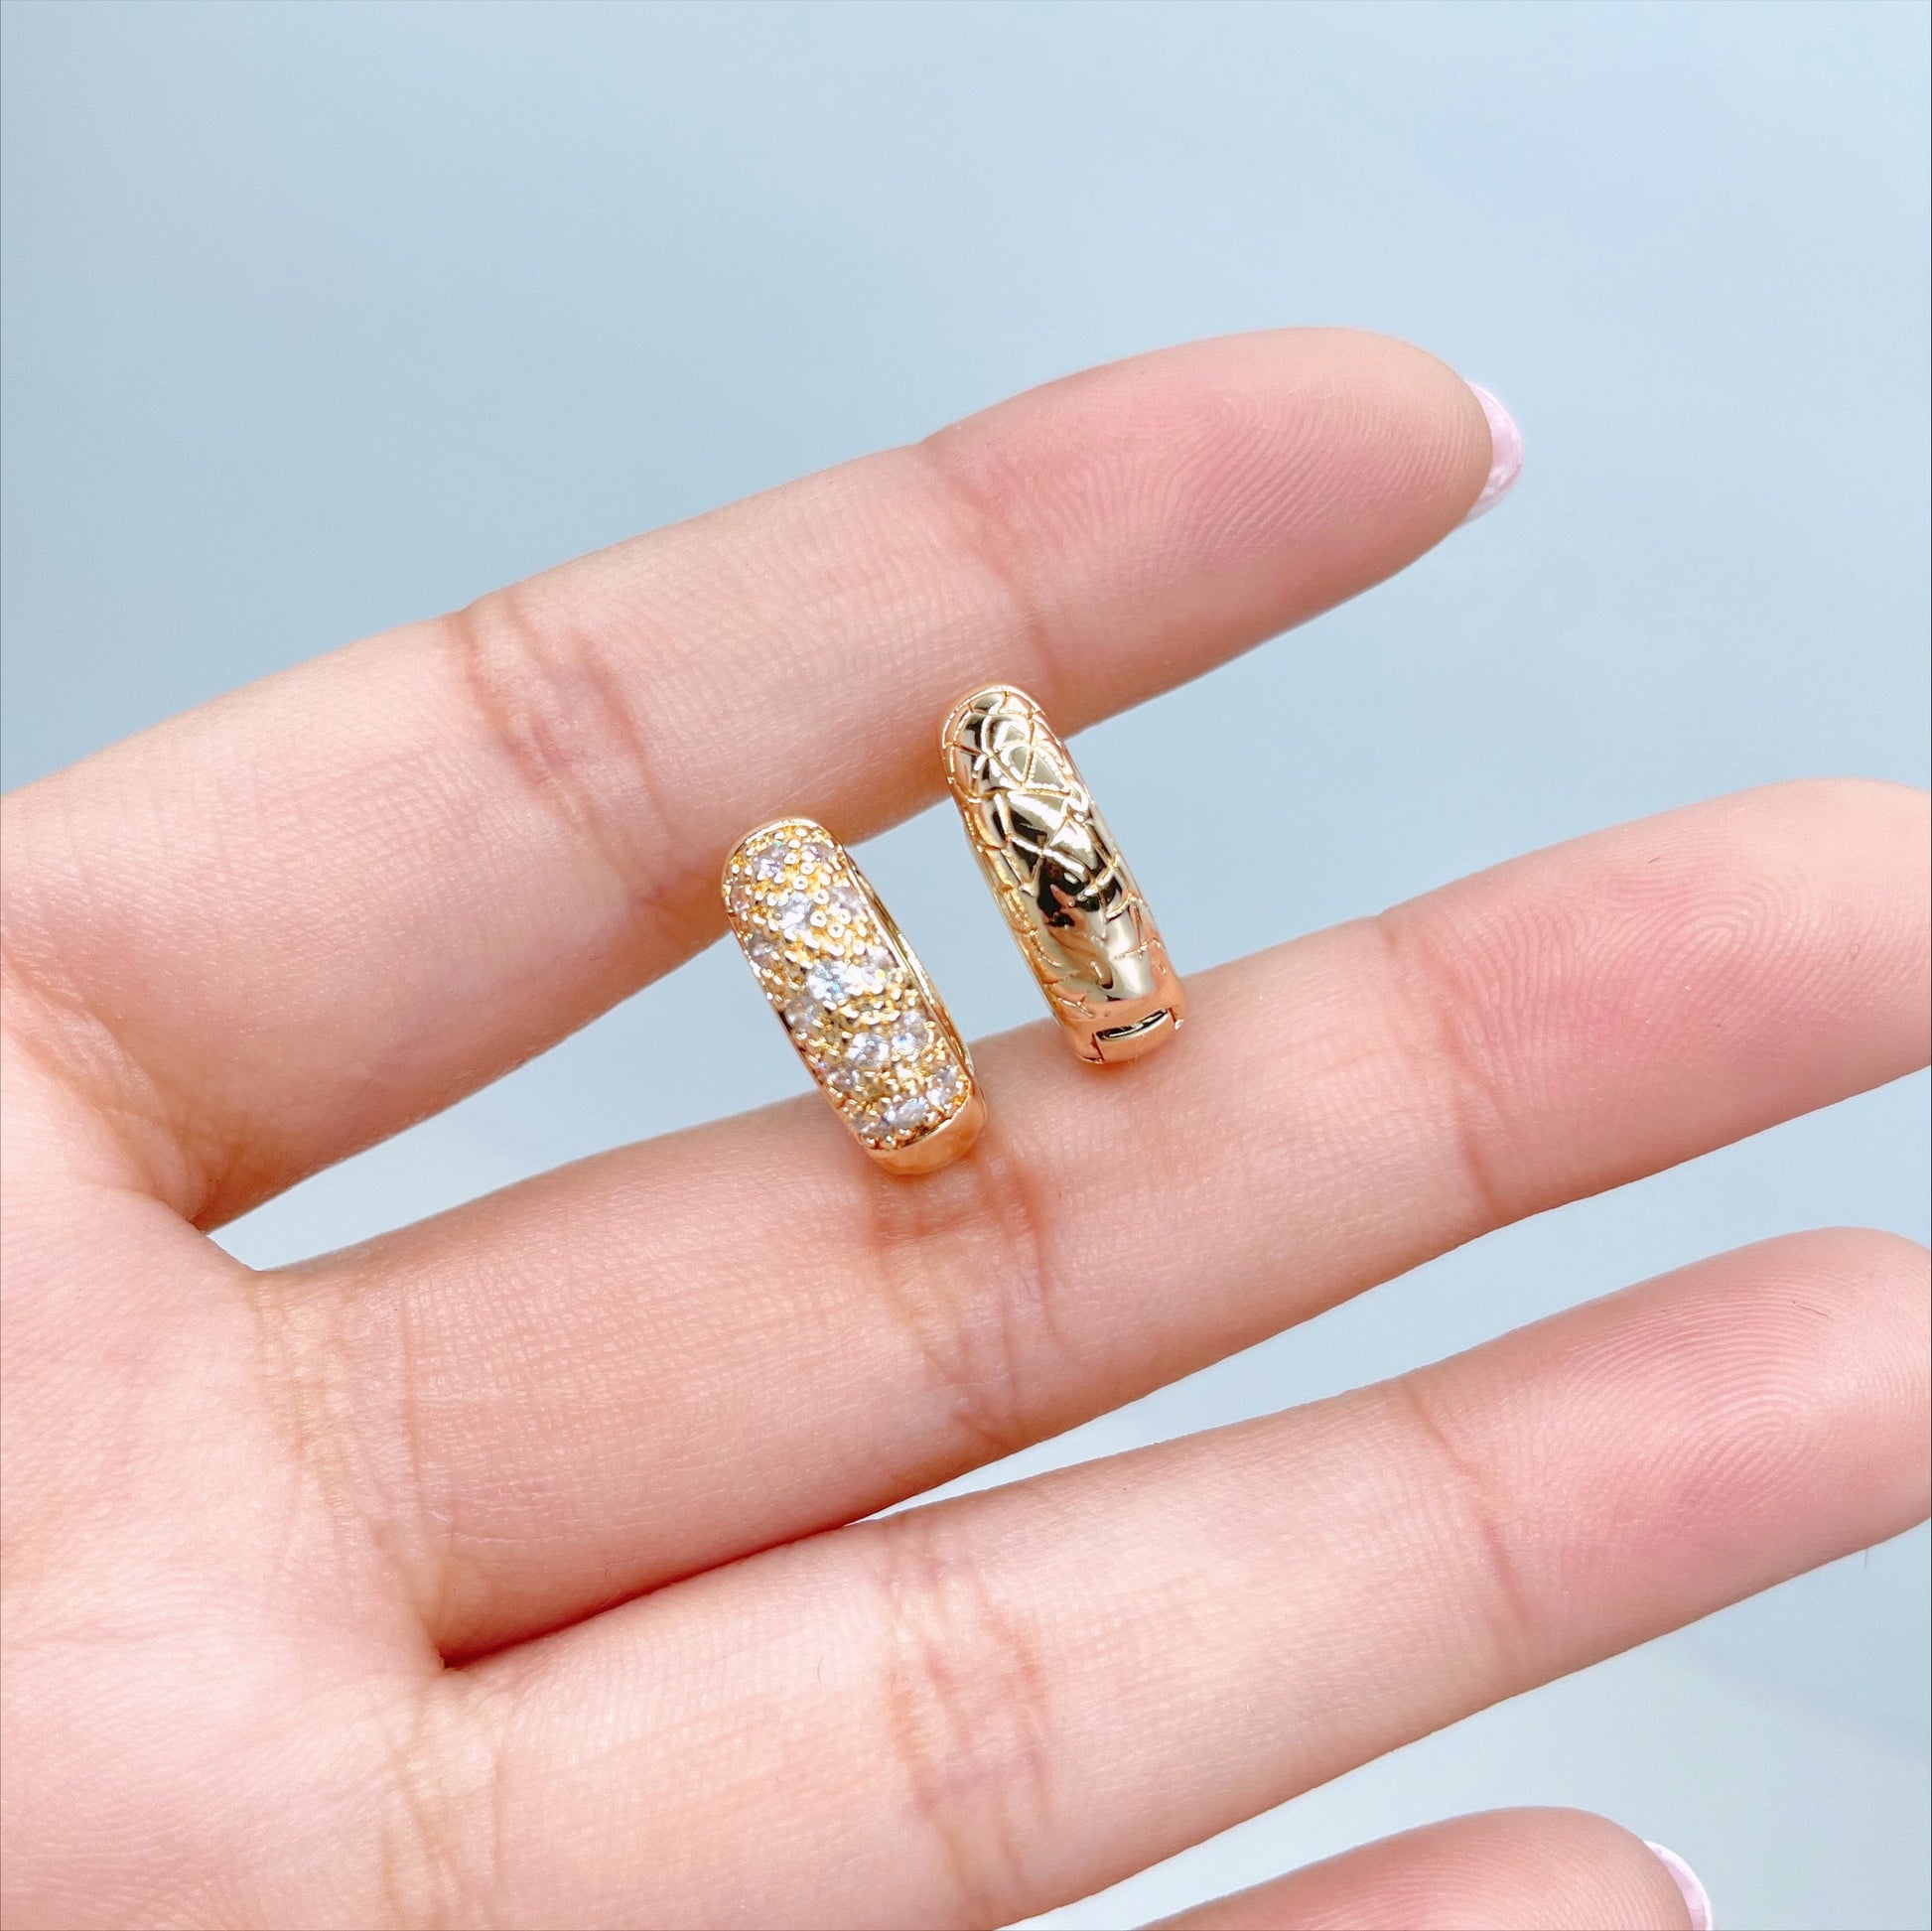 18k Gold Filled 16mm Texturized Huggie Earrings with Micro Cubic Zirconia, Wholesale Jewelry Making Supplies